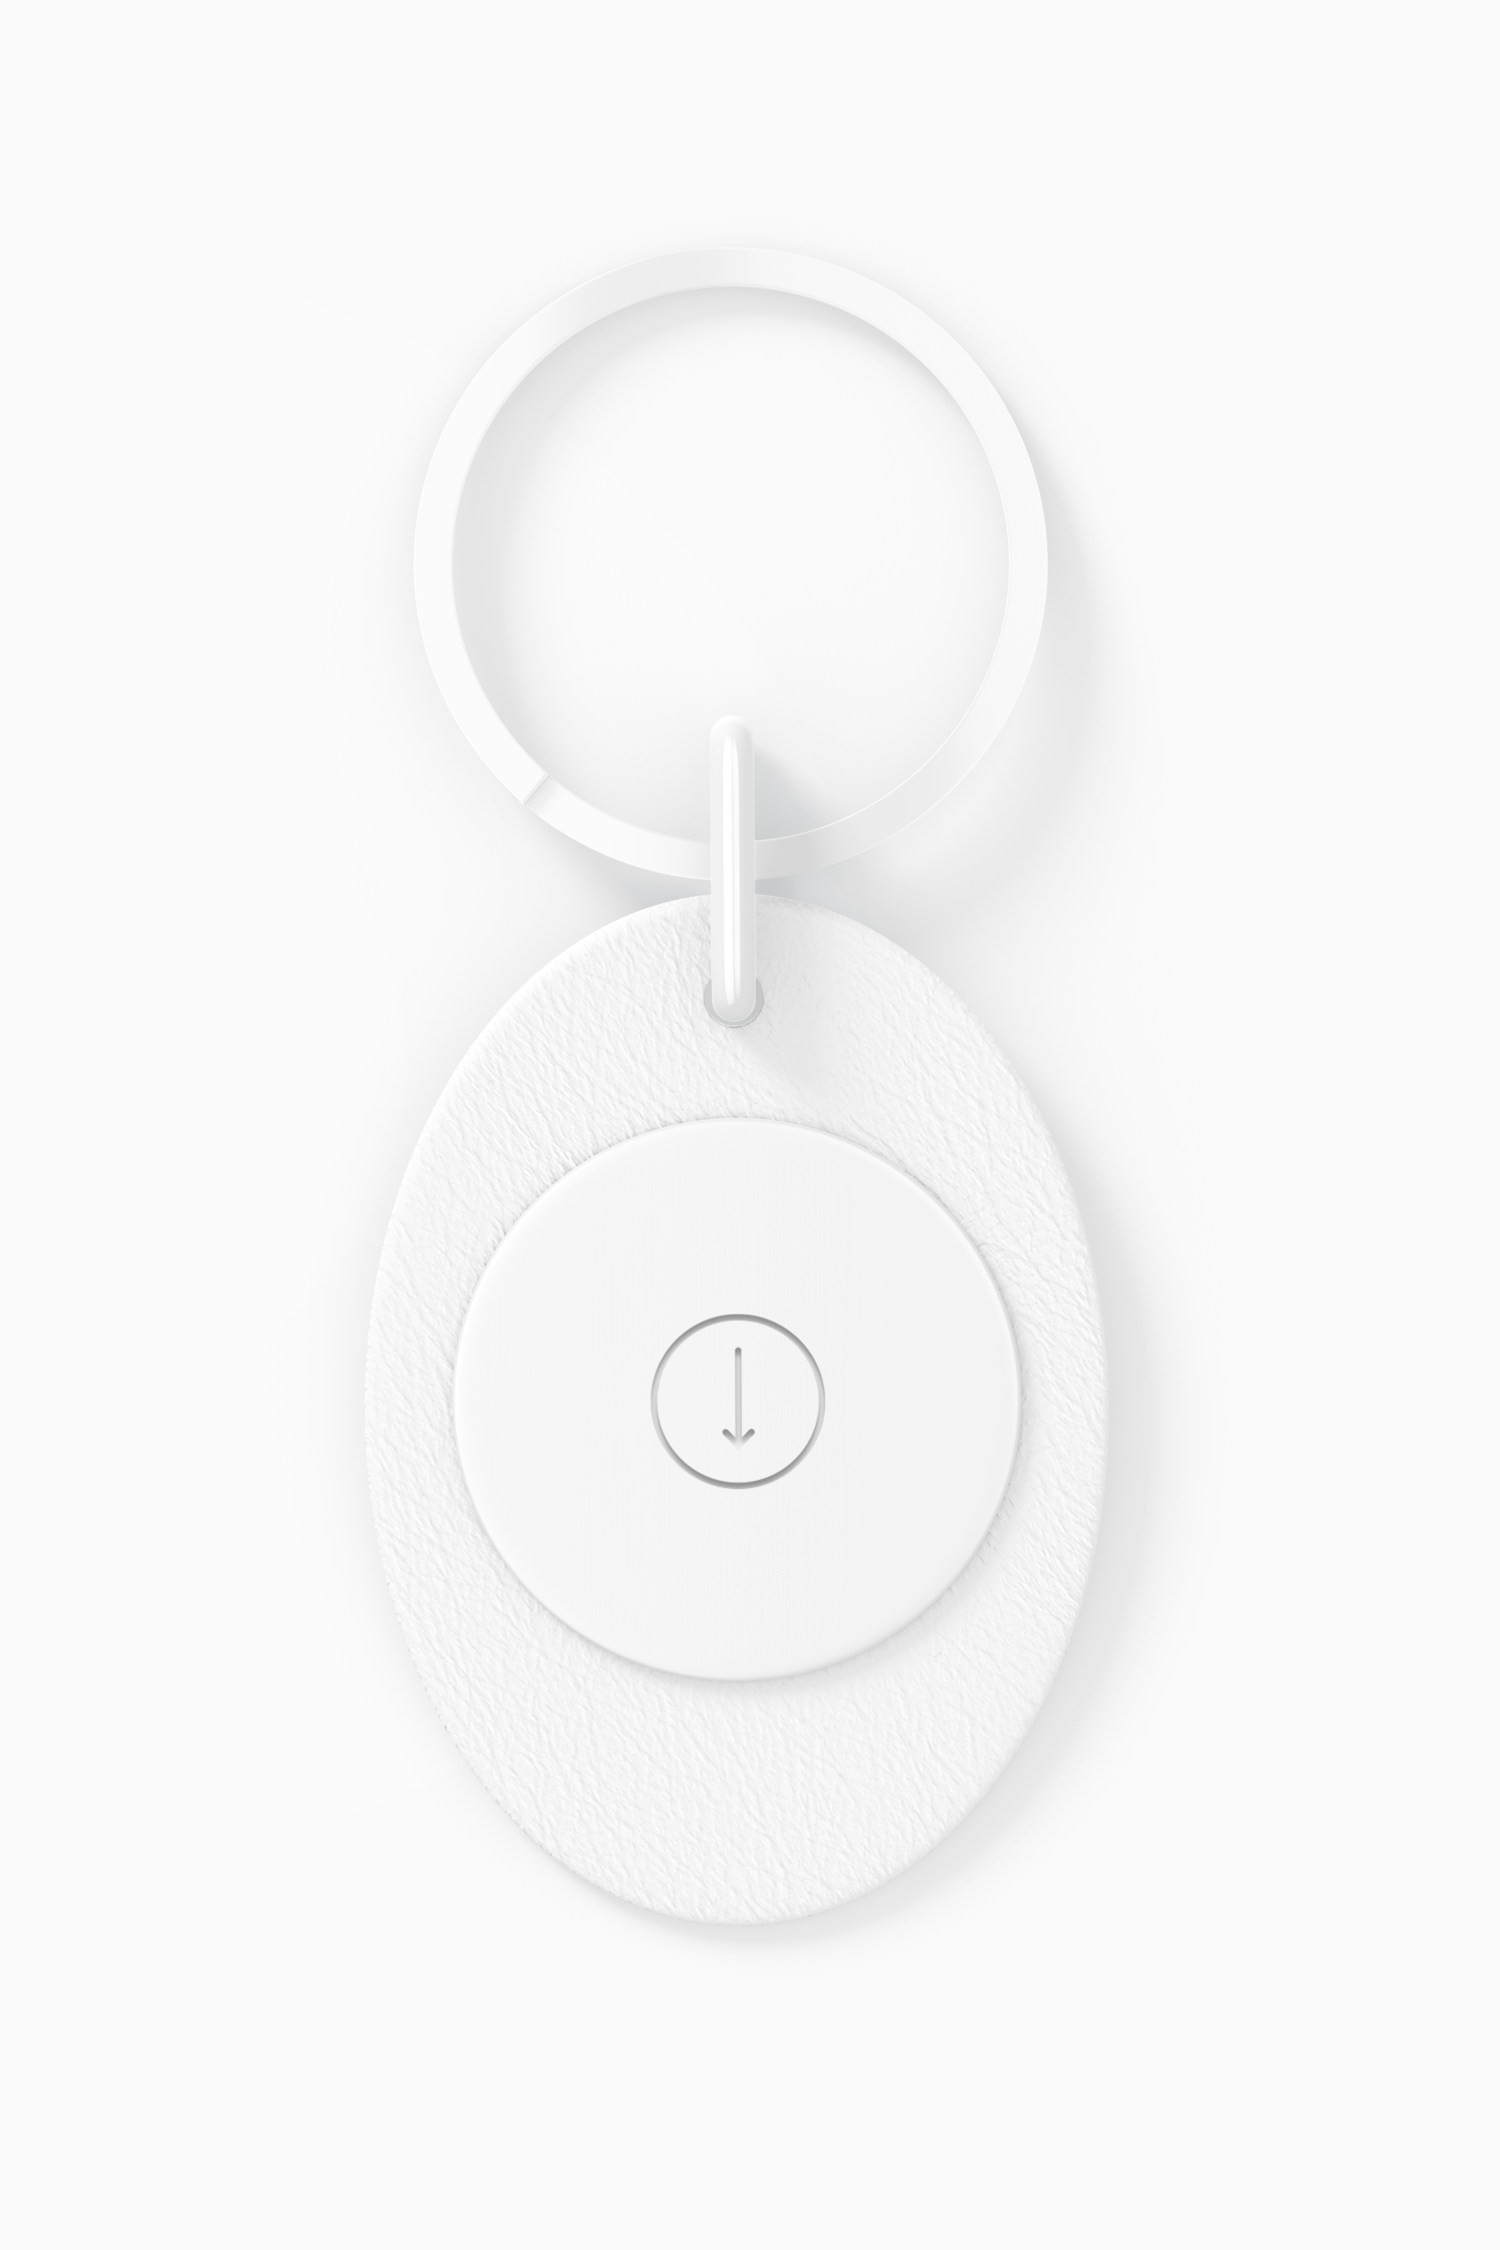 Leather Oval Keychain Mockup, Top View